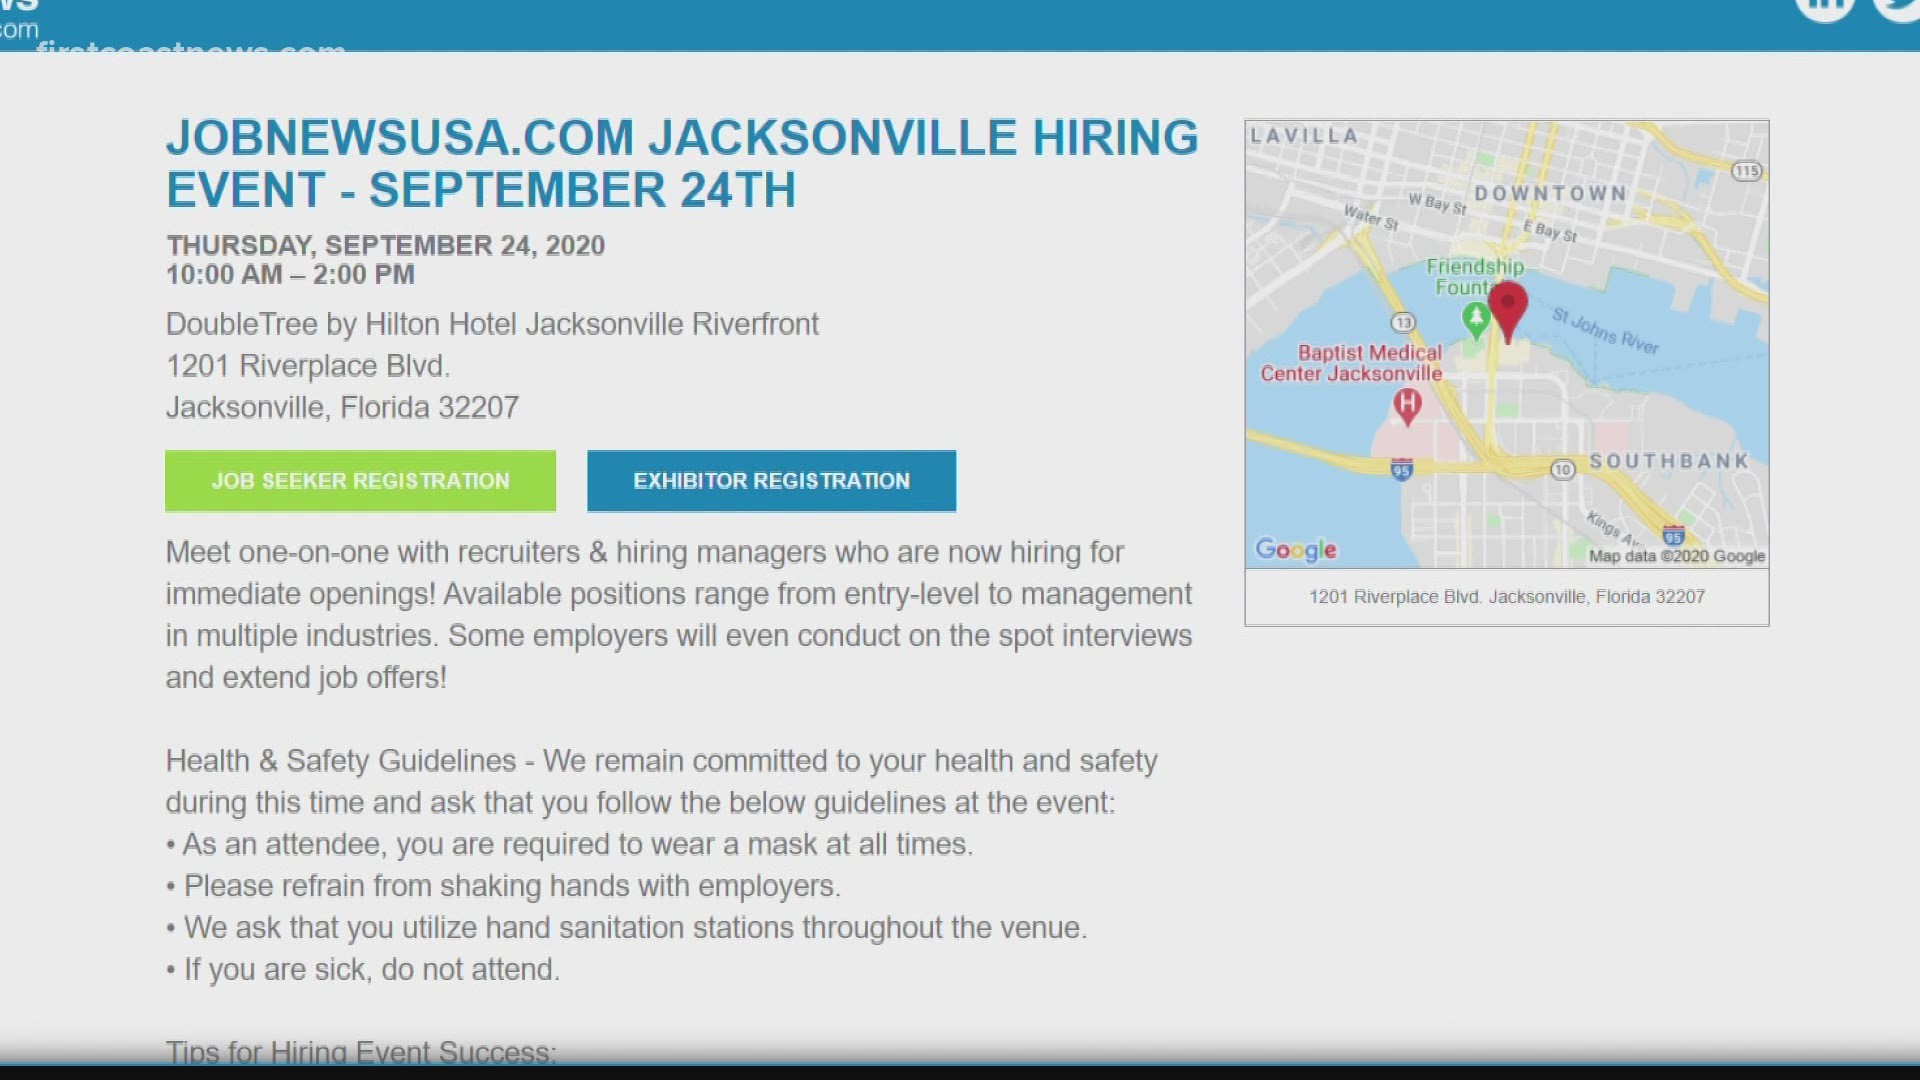 A job fair is happening this Thursday, Sept. 24, from 10 a.m. until 2 p.m. at the Riverfront Doubletree Hotel in Downtown Jacksonville. You must register to attend.